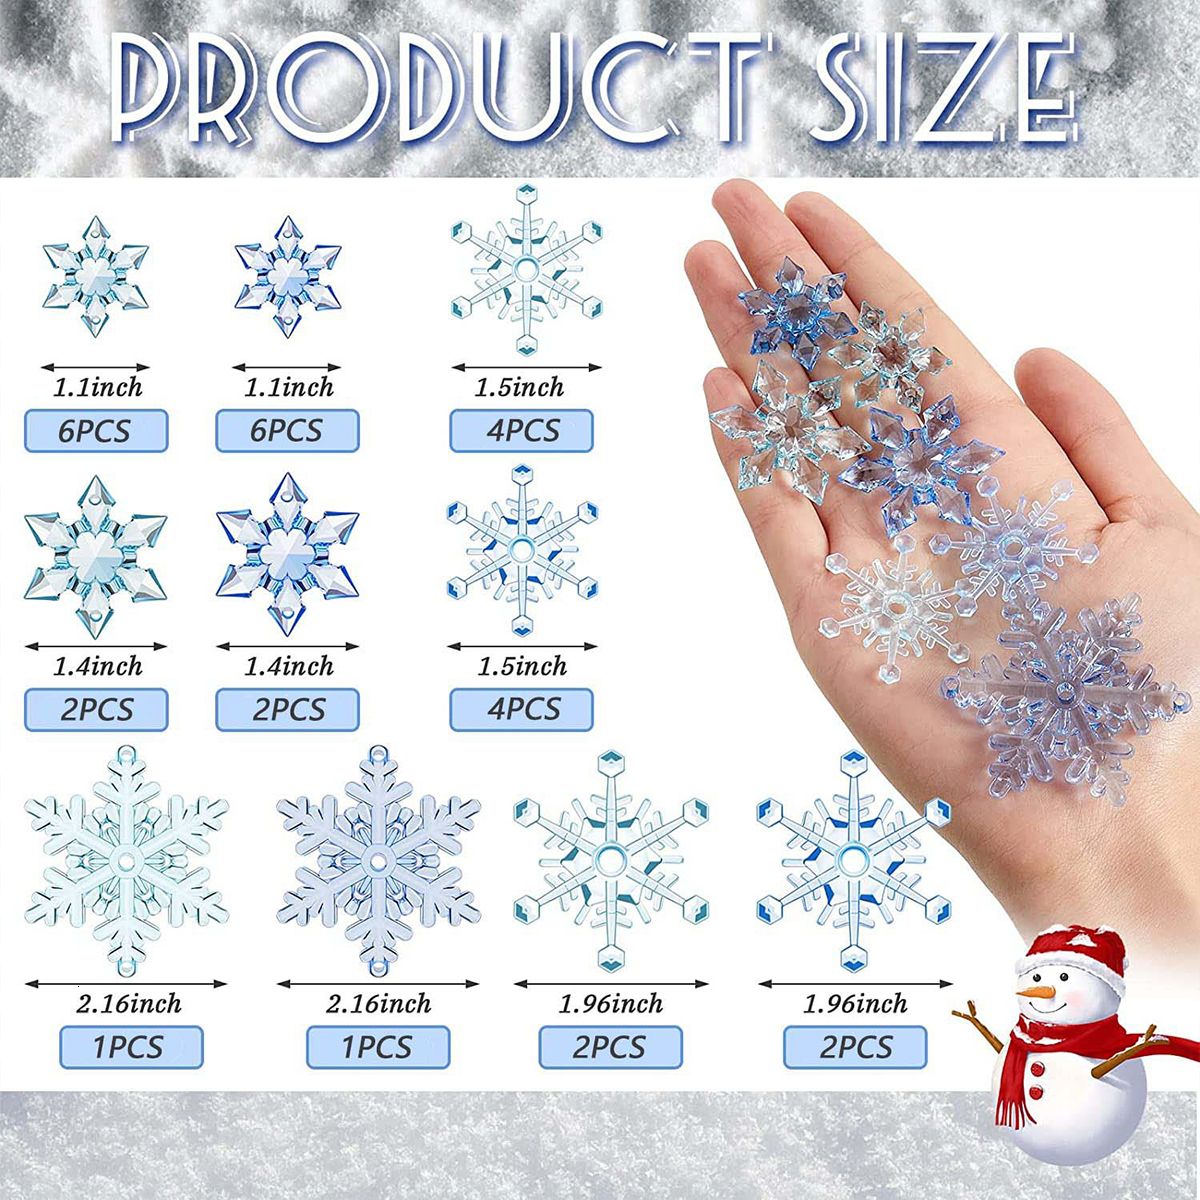 Vases Christmas Vase Filler Durable Acrylic Floating Pearls For Creative  Pearl Snowflake Water Gels Beads Table 230625 From Ren10, $8.87